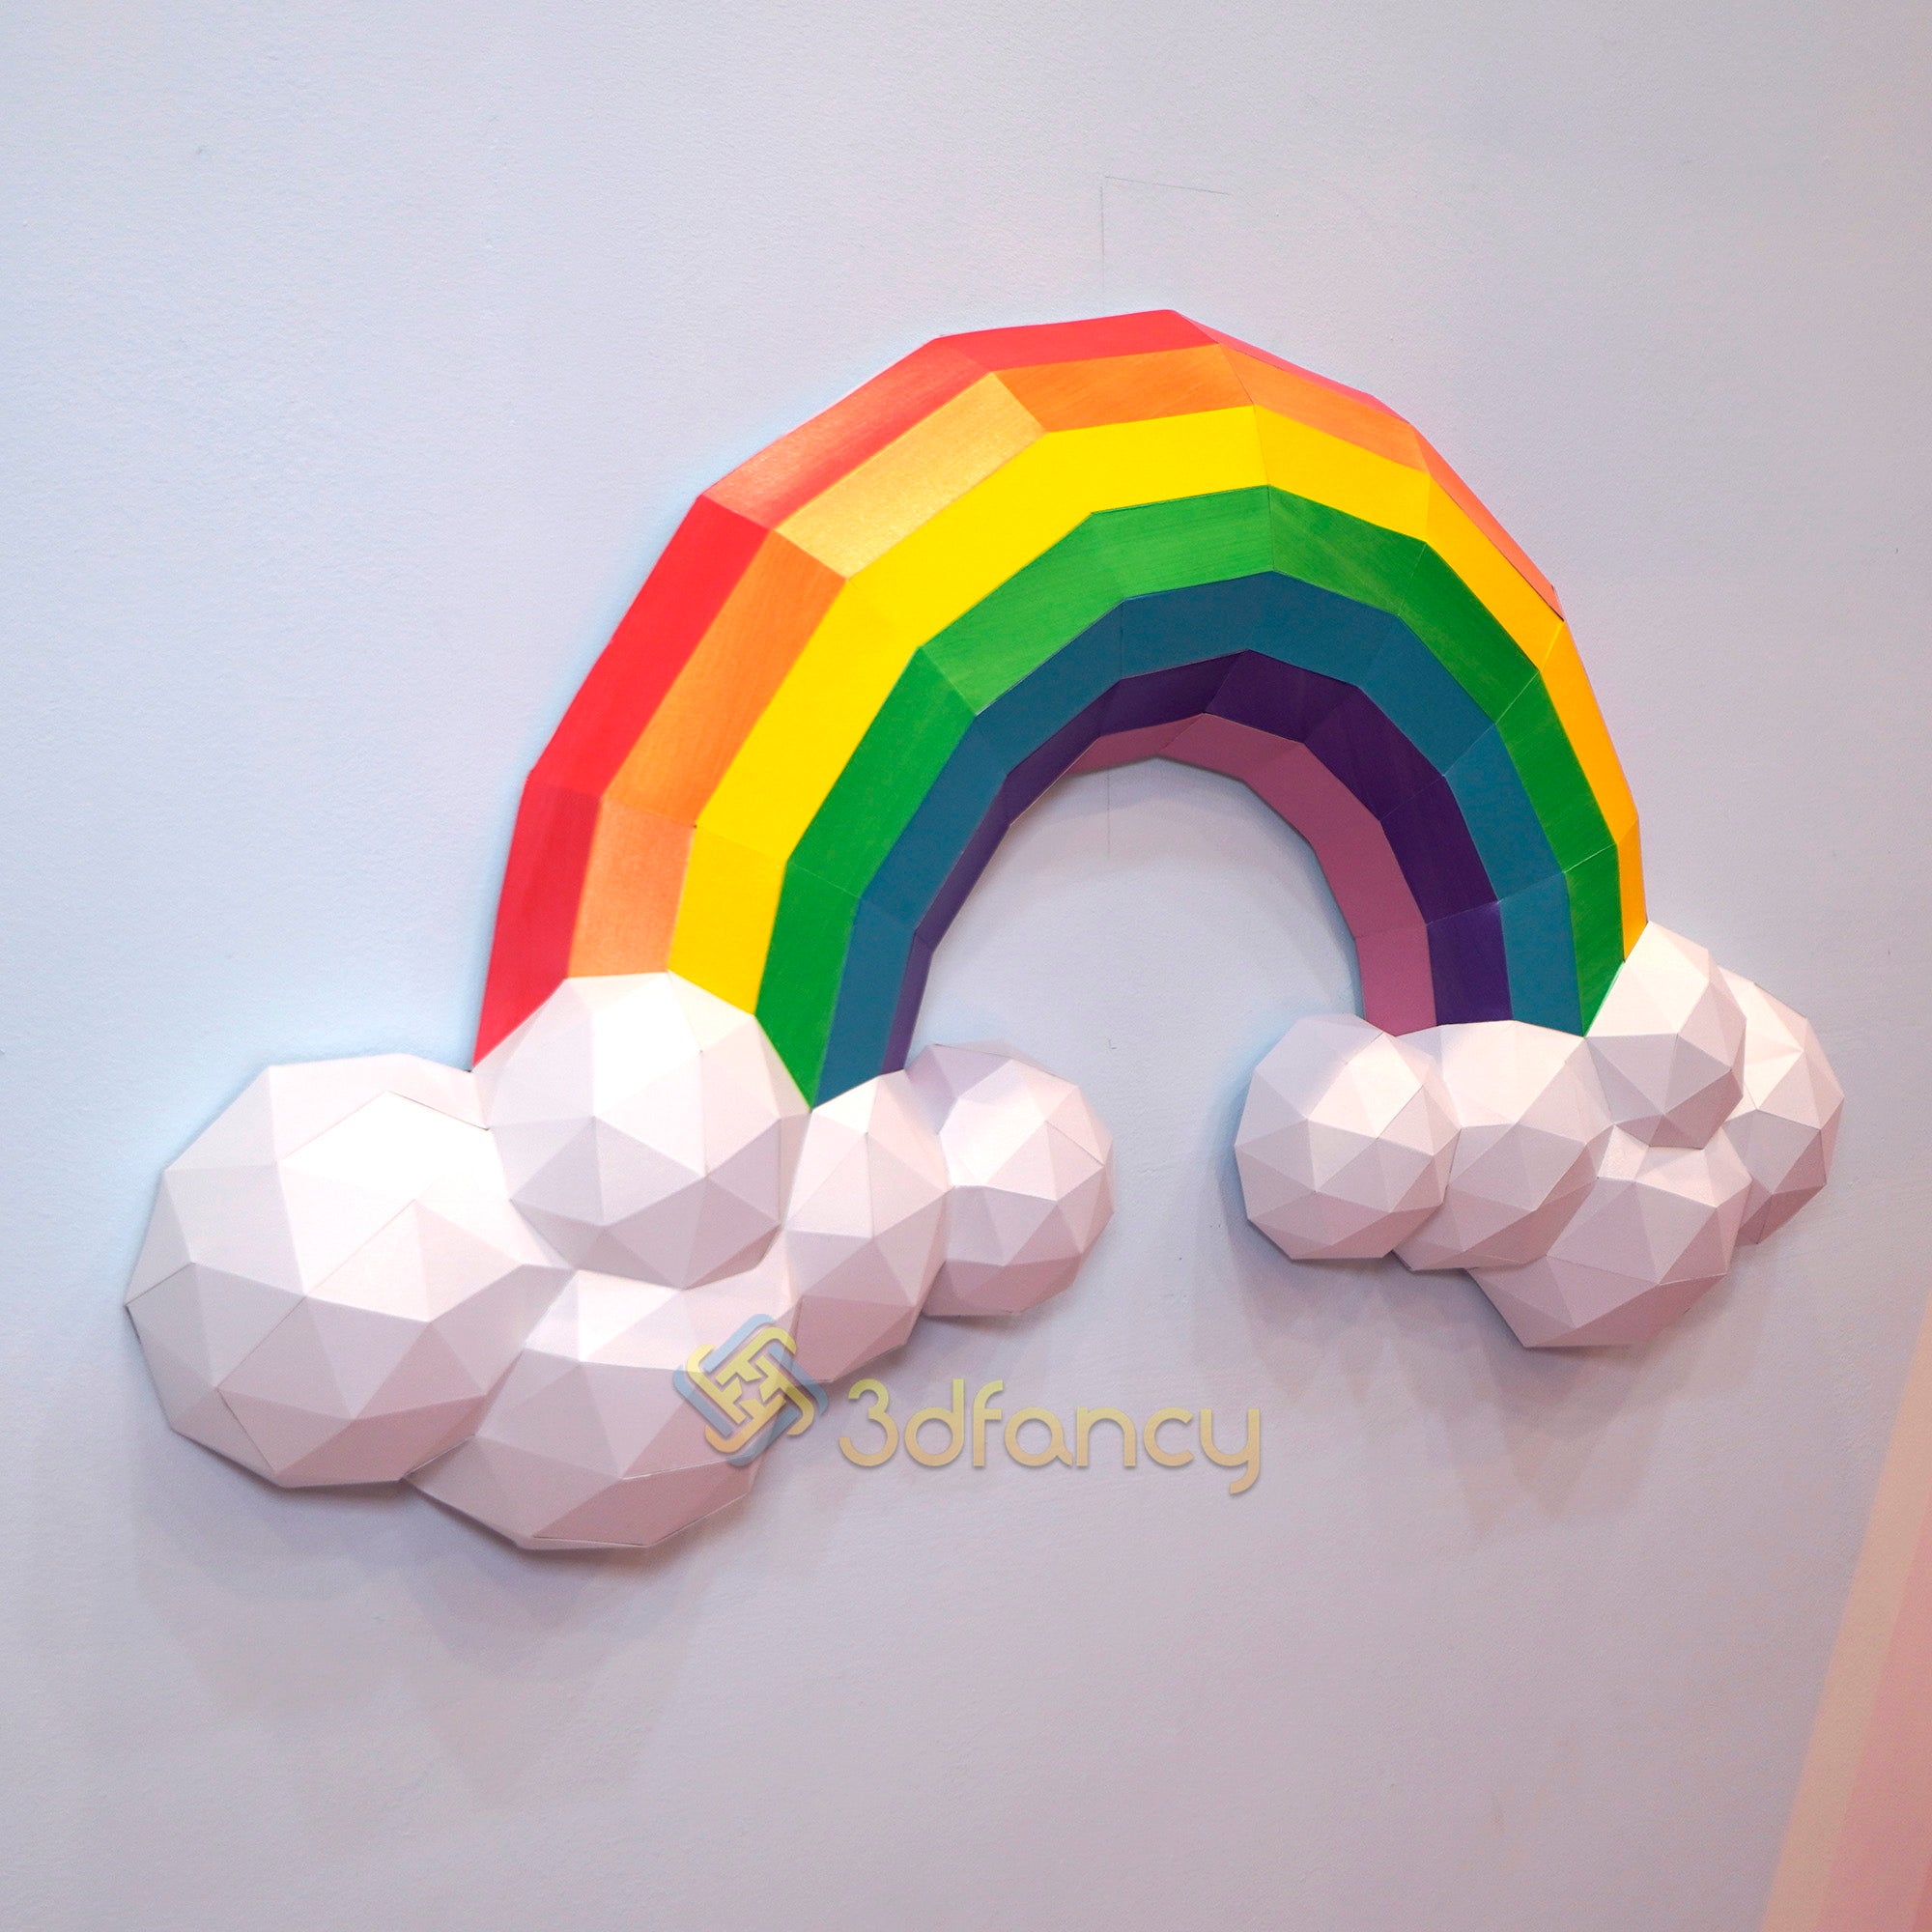 Rainbow Papercraft PDF, SVG Template Template Compatible with Cricut, Cameo 4, Scanncut